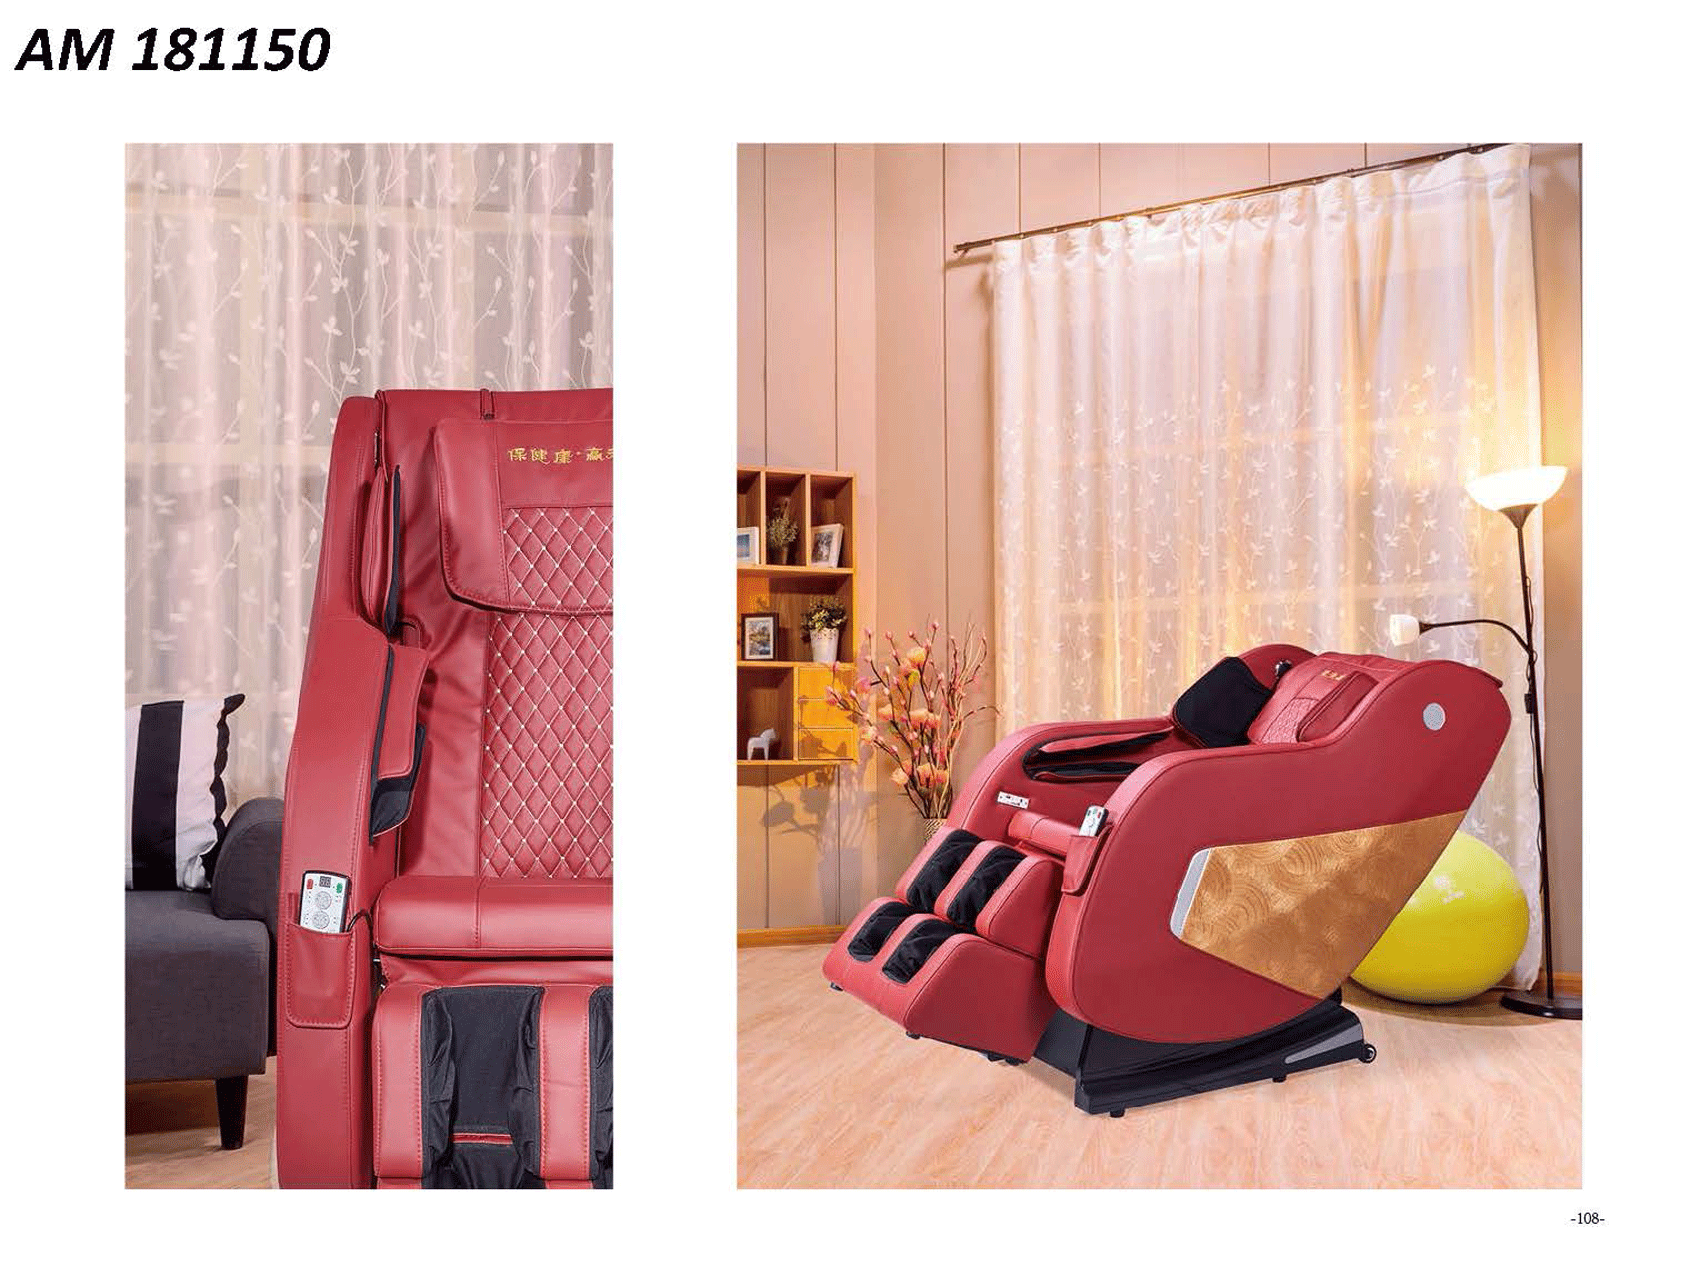 Dining Room Furniture Modern Dining Room Sets AM 181150 Massage Chair